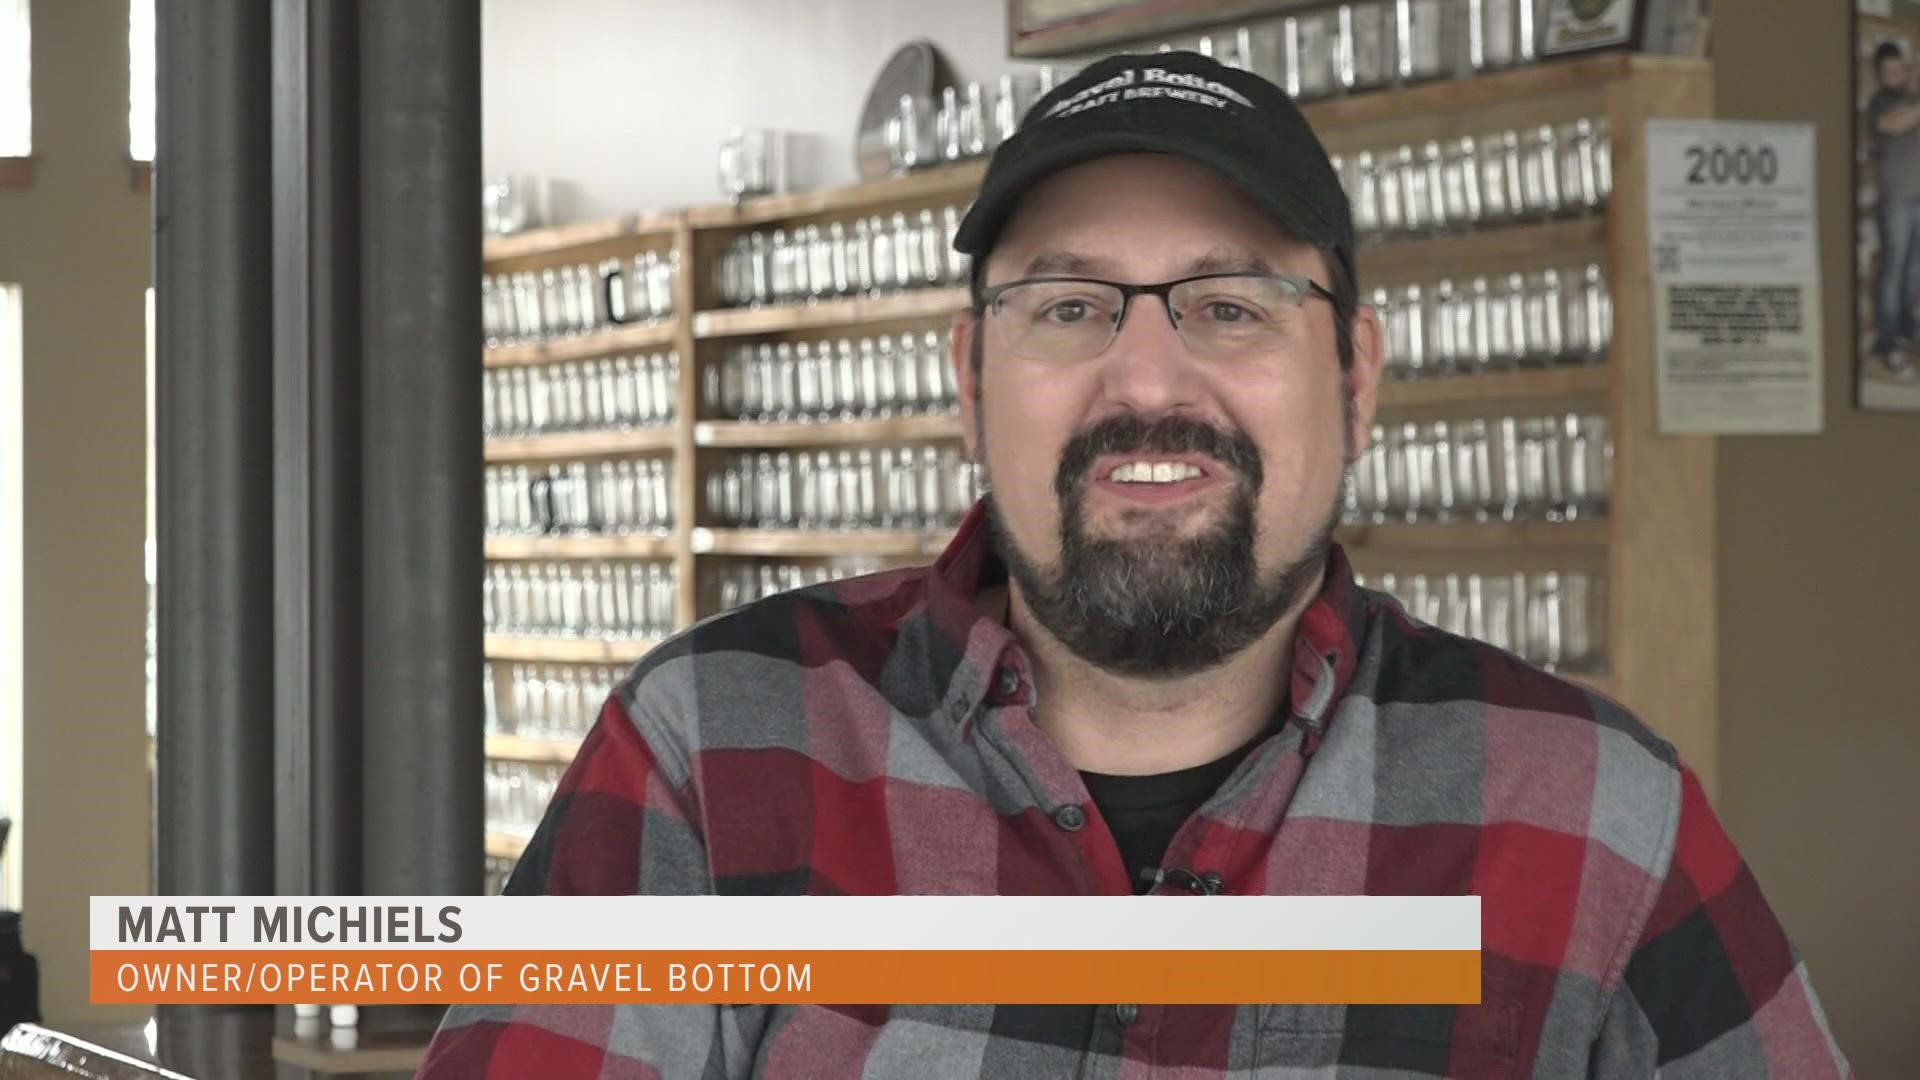 Matt Michiels opened Gravel Bottom Craft Brewery 10 years ago, and it's been a staple in Ada ever since.